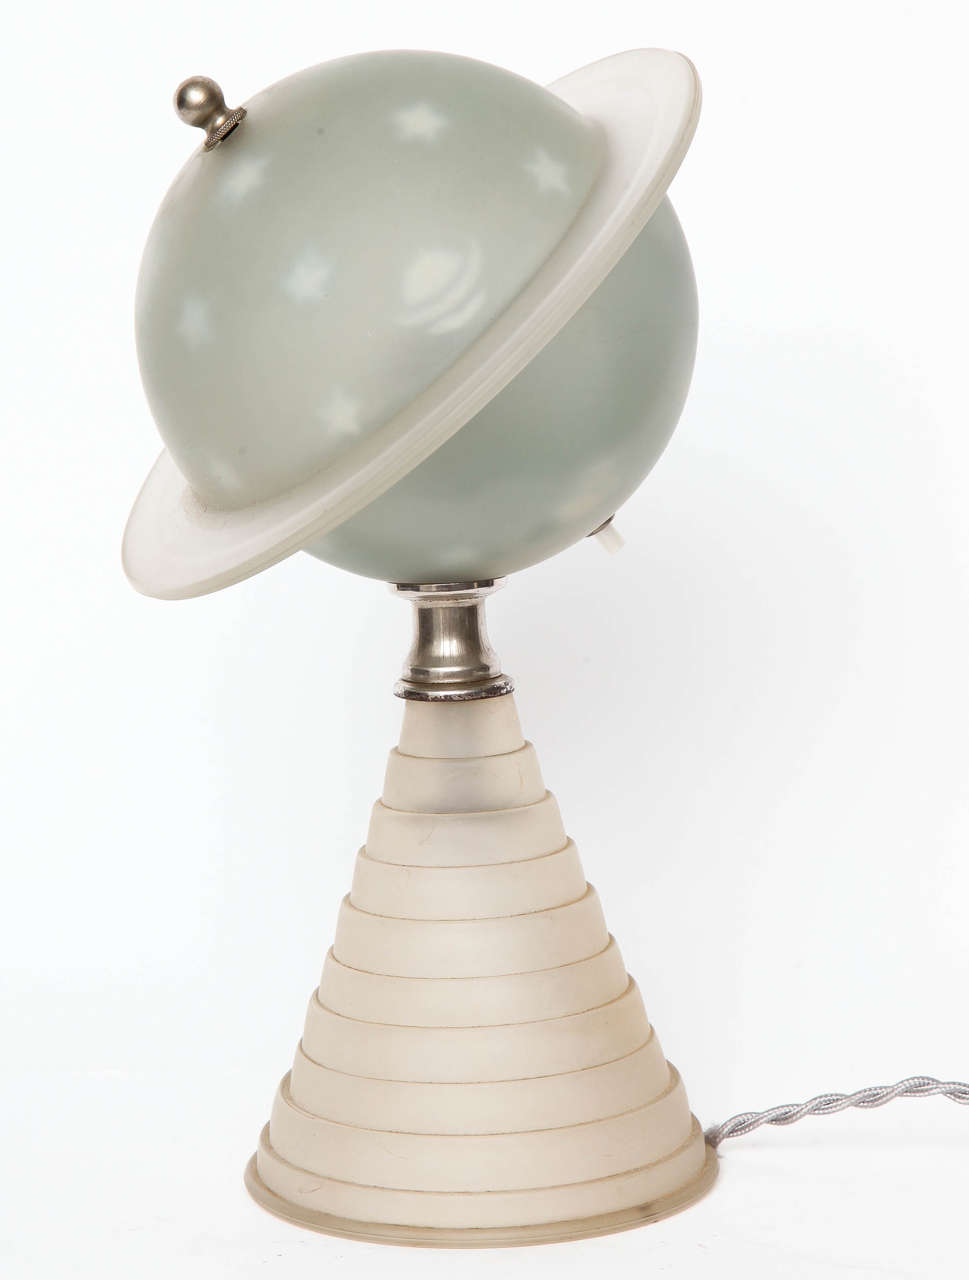 Rare molded glass table lamp in the style of Marius Sabino or Muller glass.